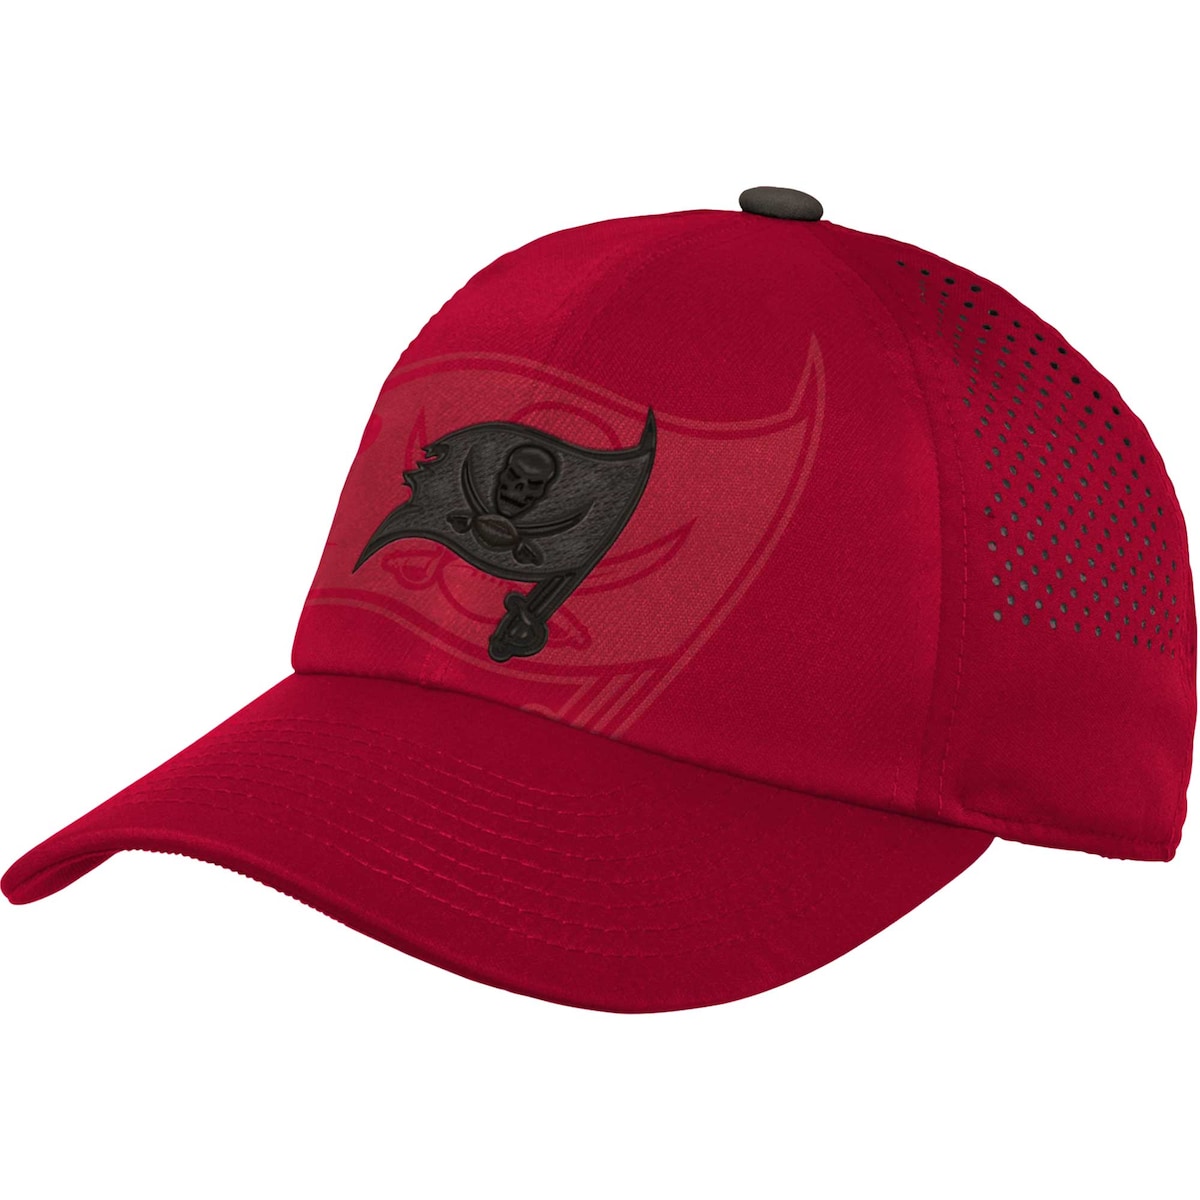 Help your kiddo showcase their growing Tampa Bay Buccaneers fandom by finishing their game day look with this Tailgate hat. It features the Tampa Bay Buccaneers logo embroidered front and center along with a larger version printed across the whole crown. The perforated rear panels also offer optimal breathability, making this adjustable cap the perfect grab in sunny weather.Curved billOfficially licensedLow CrownAdjustable hook and loop fastener strapSolid front panels with eyeletsBrand: OuterstuffPrinted designMaterial: 100% PolyesterEmbroidered graphicsUnstructured relaxed fitWipe clean with a damp clothImportedPerforated rear panelsOne size fits most